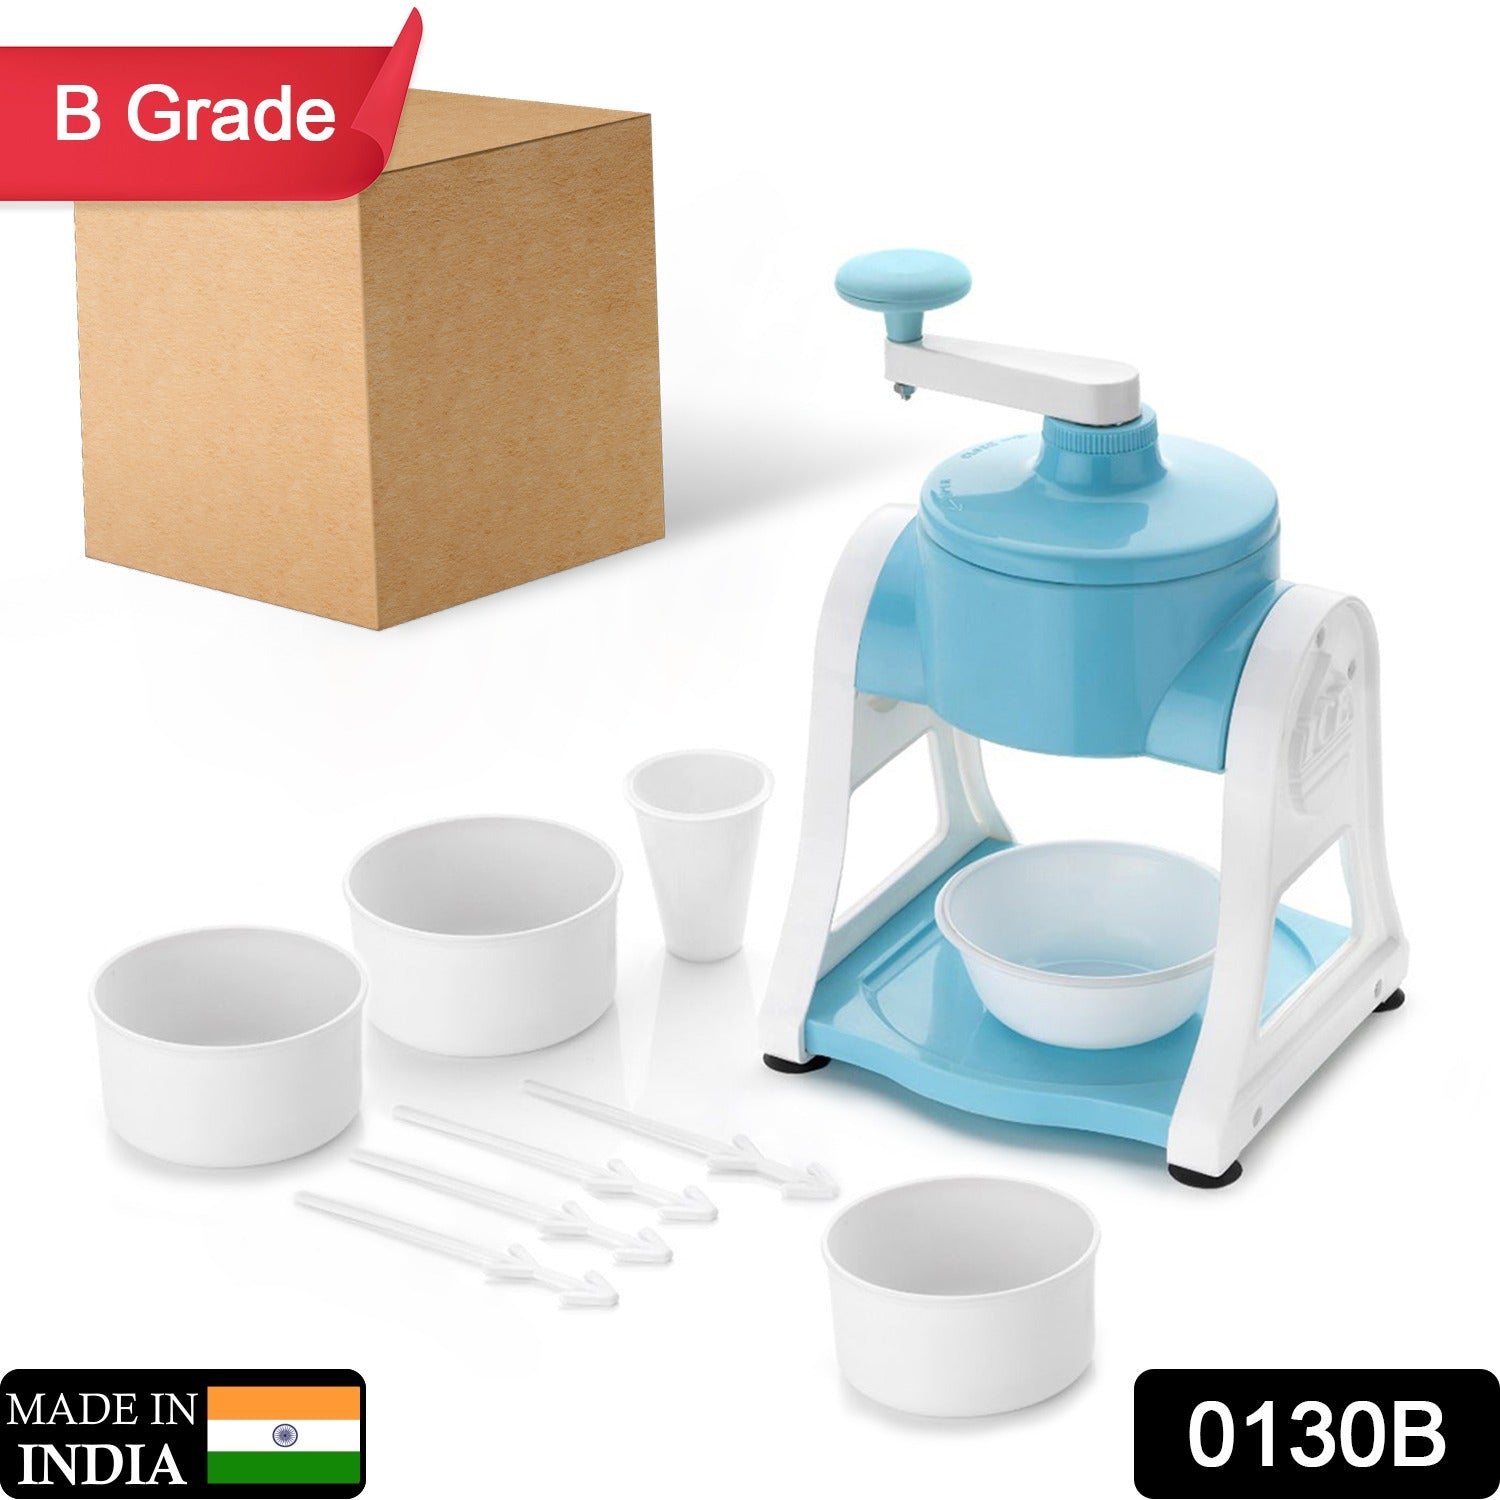 0130B  BLUE GOLA MAKER USED FOR MAKING GOLA’S IN SUMMERS AT VARIOUS KINDS OF PLACES AND ALL ( B Grade) JK Trends